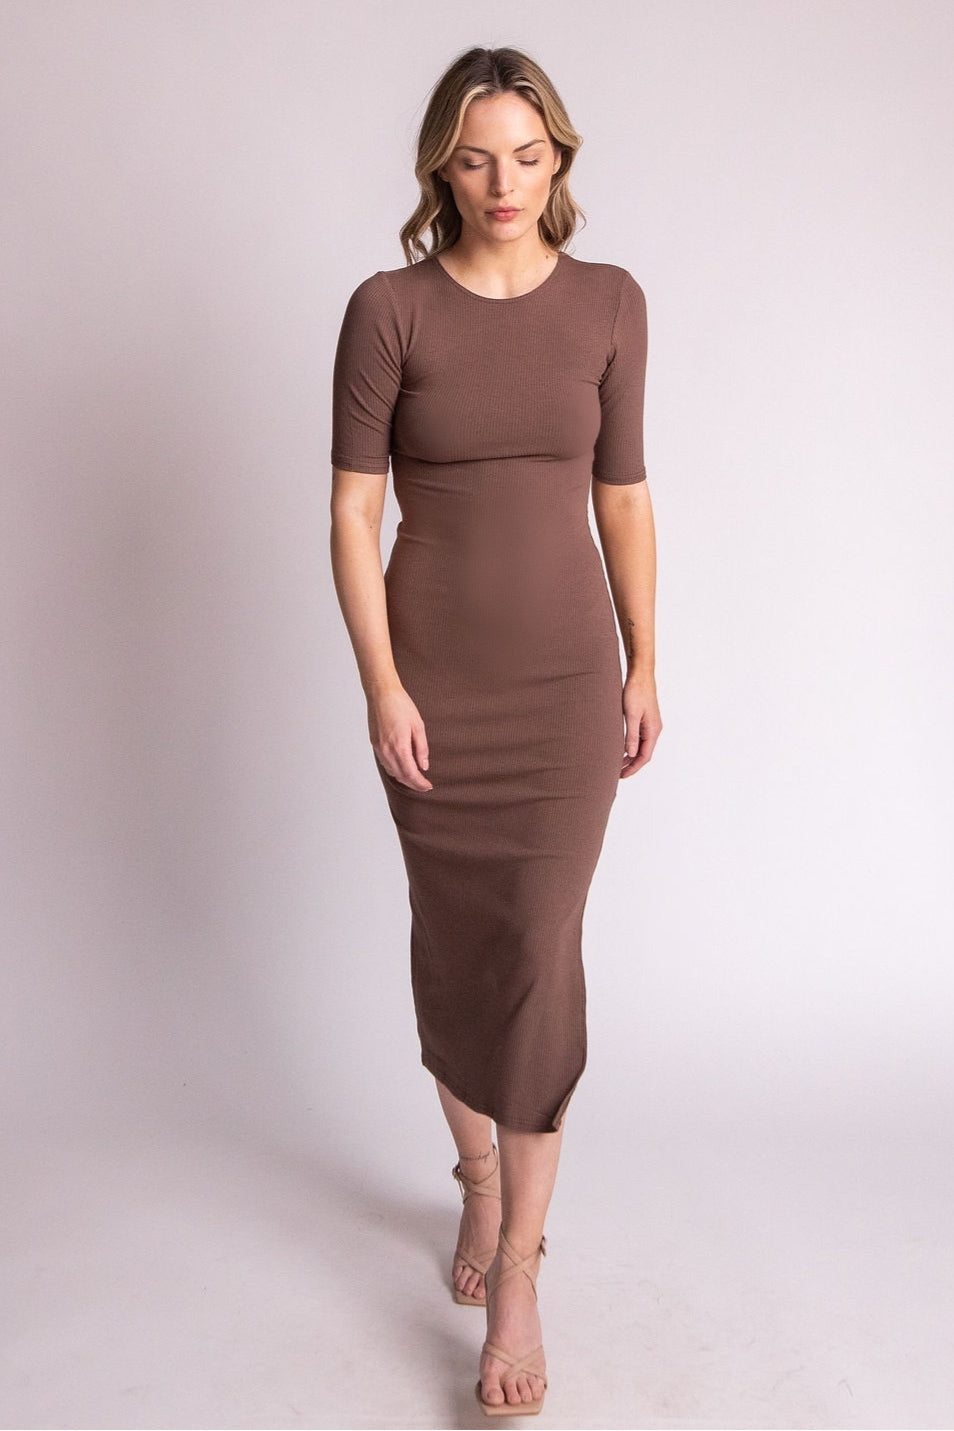 The Stunner Ribbed Open Back Midi Dress - Expressive Collective CO.